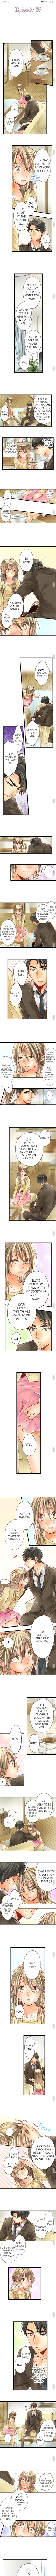 25-Year-Old High School Girl, I Wouldn’t Do This with a Kid Ch.25